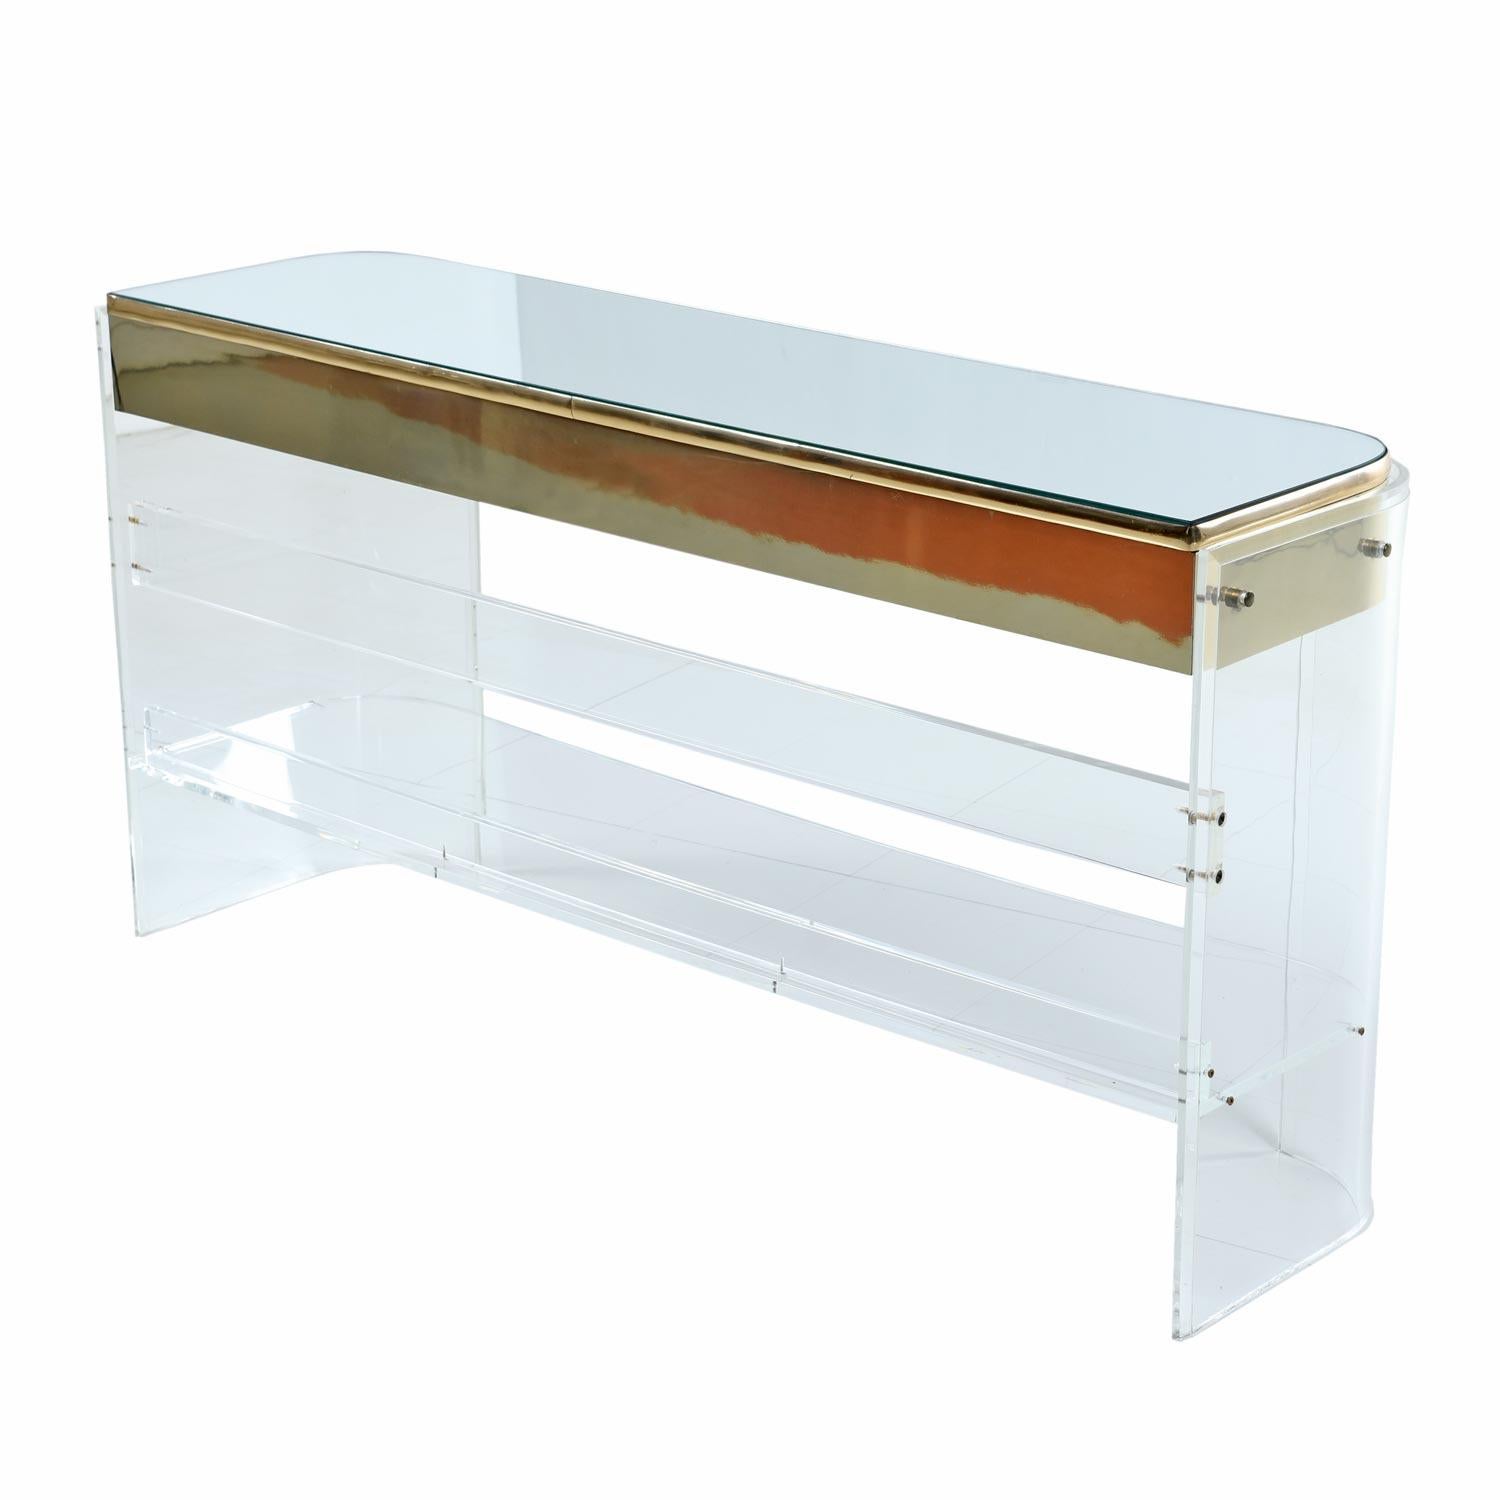 This vintage 1970s neo-deco brass / gold colored Lucite acrylic console exudes glamour. Light bounces off the curved brass trim and refracts through the Lucite. The transparent lower tiered shelf adds practicality and almost disappears, which gives